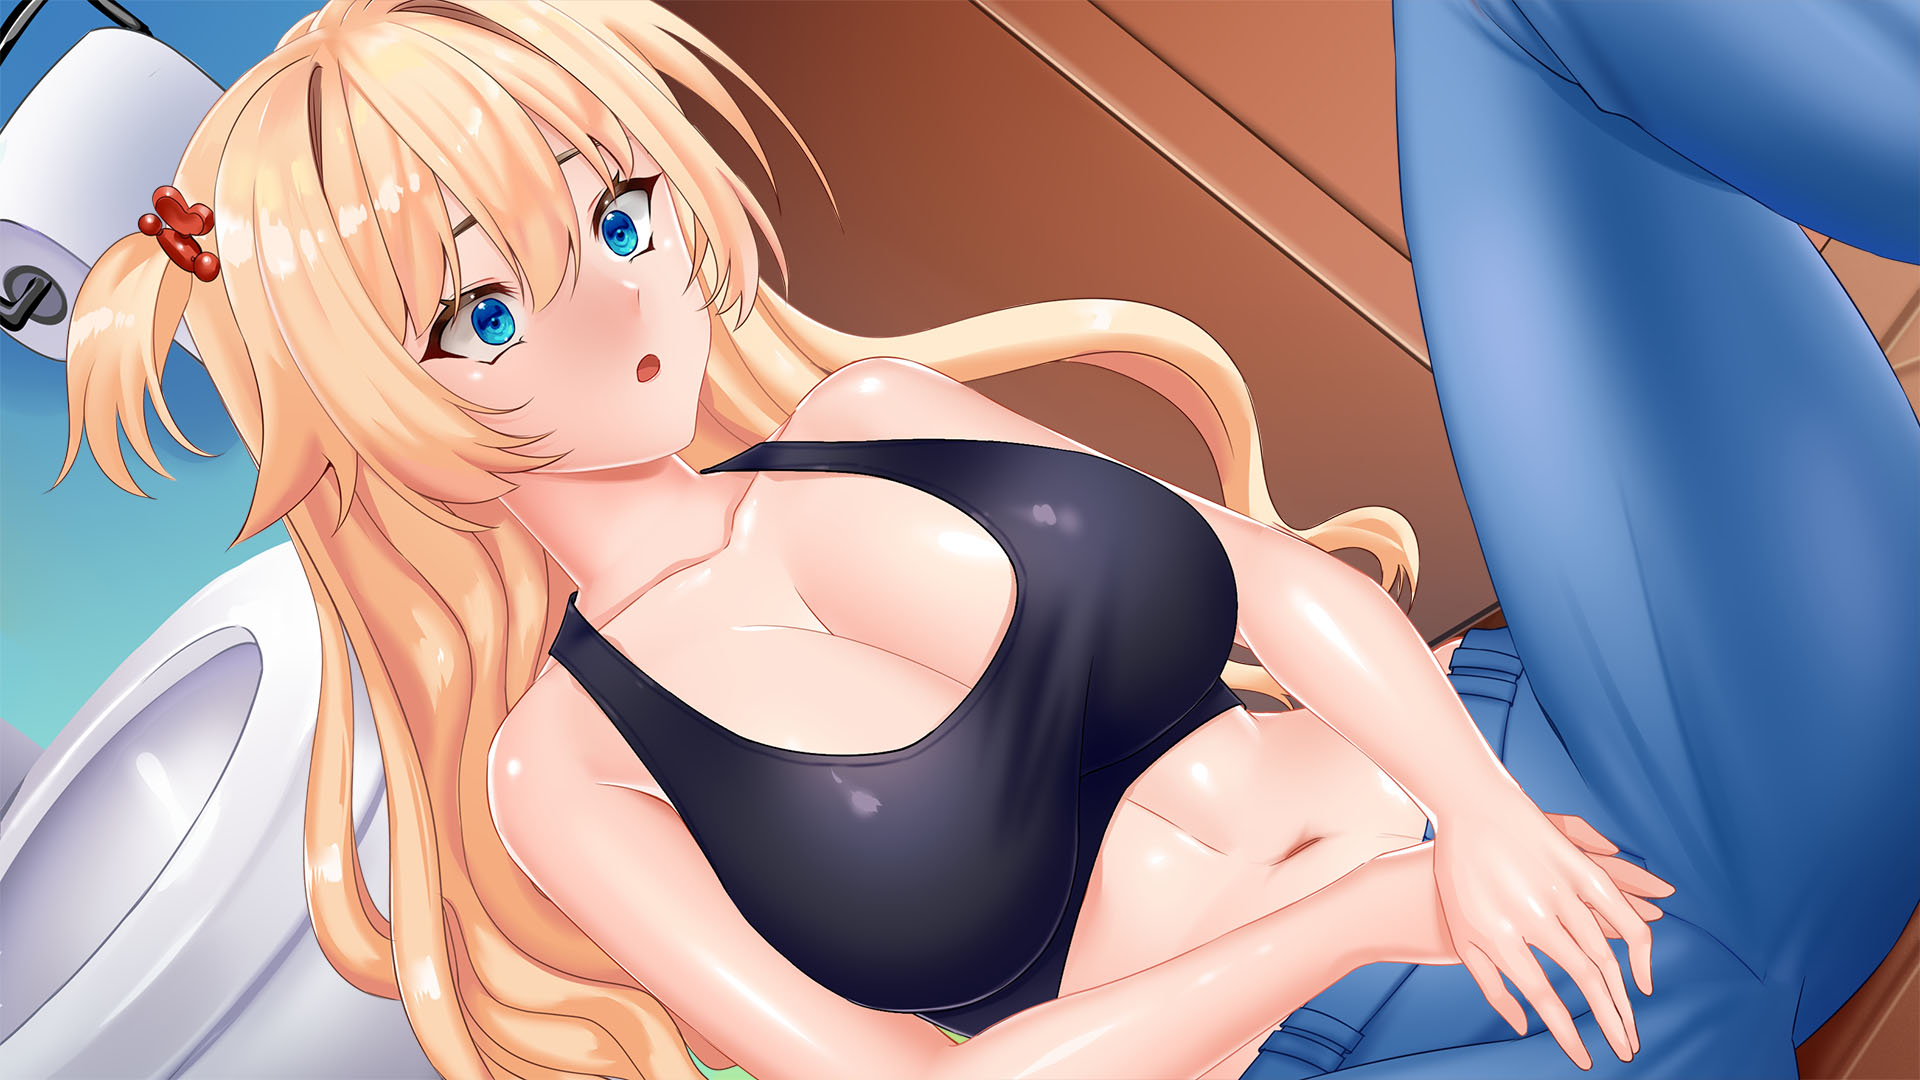 Animated Gif Of Busty Ecchi Oppai Hentai Warrior Game Babe In A Gaming Sprite From Trollbusters